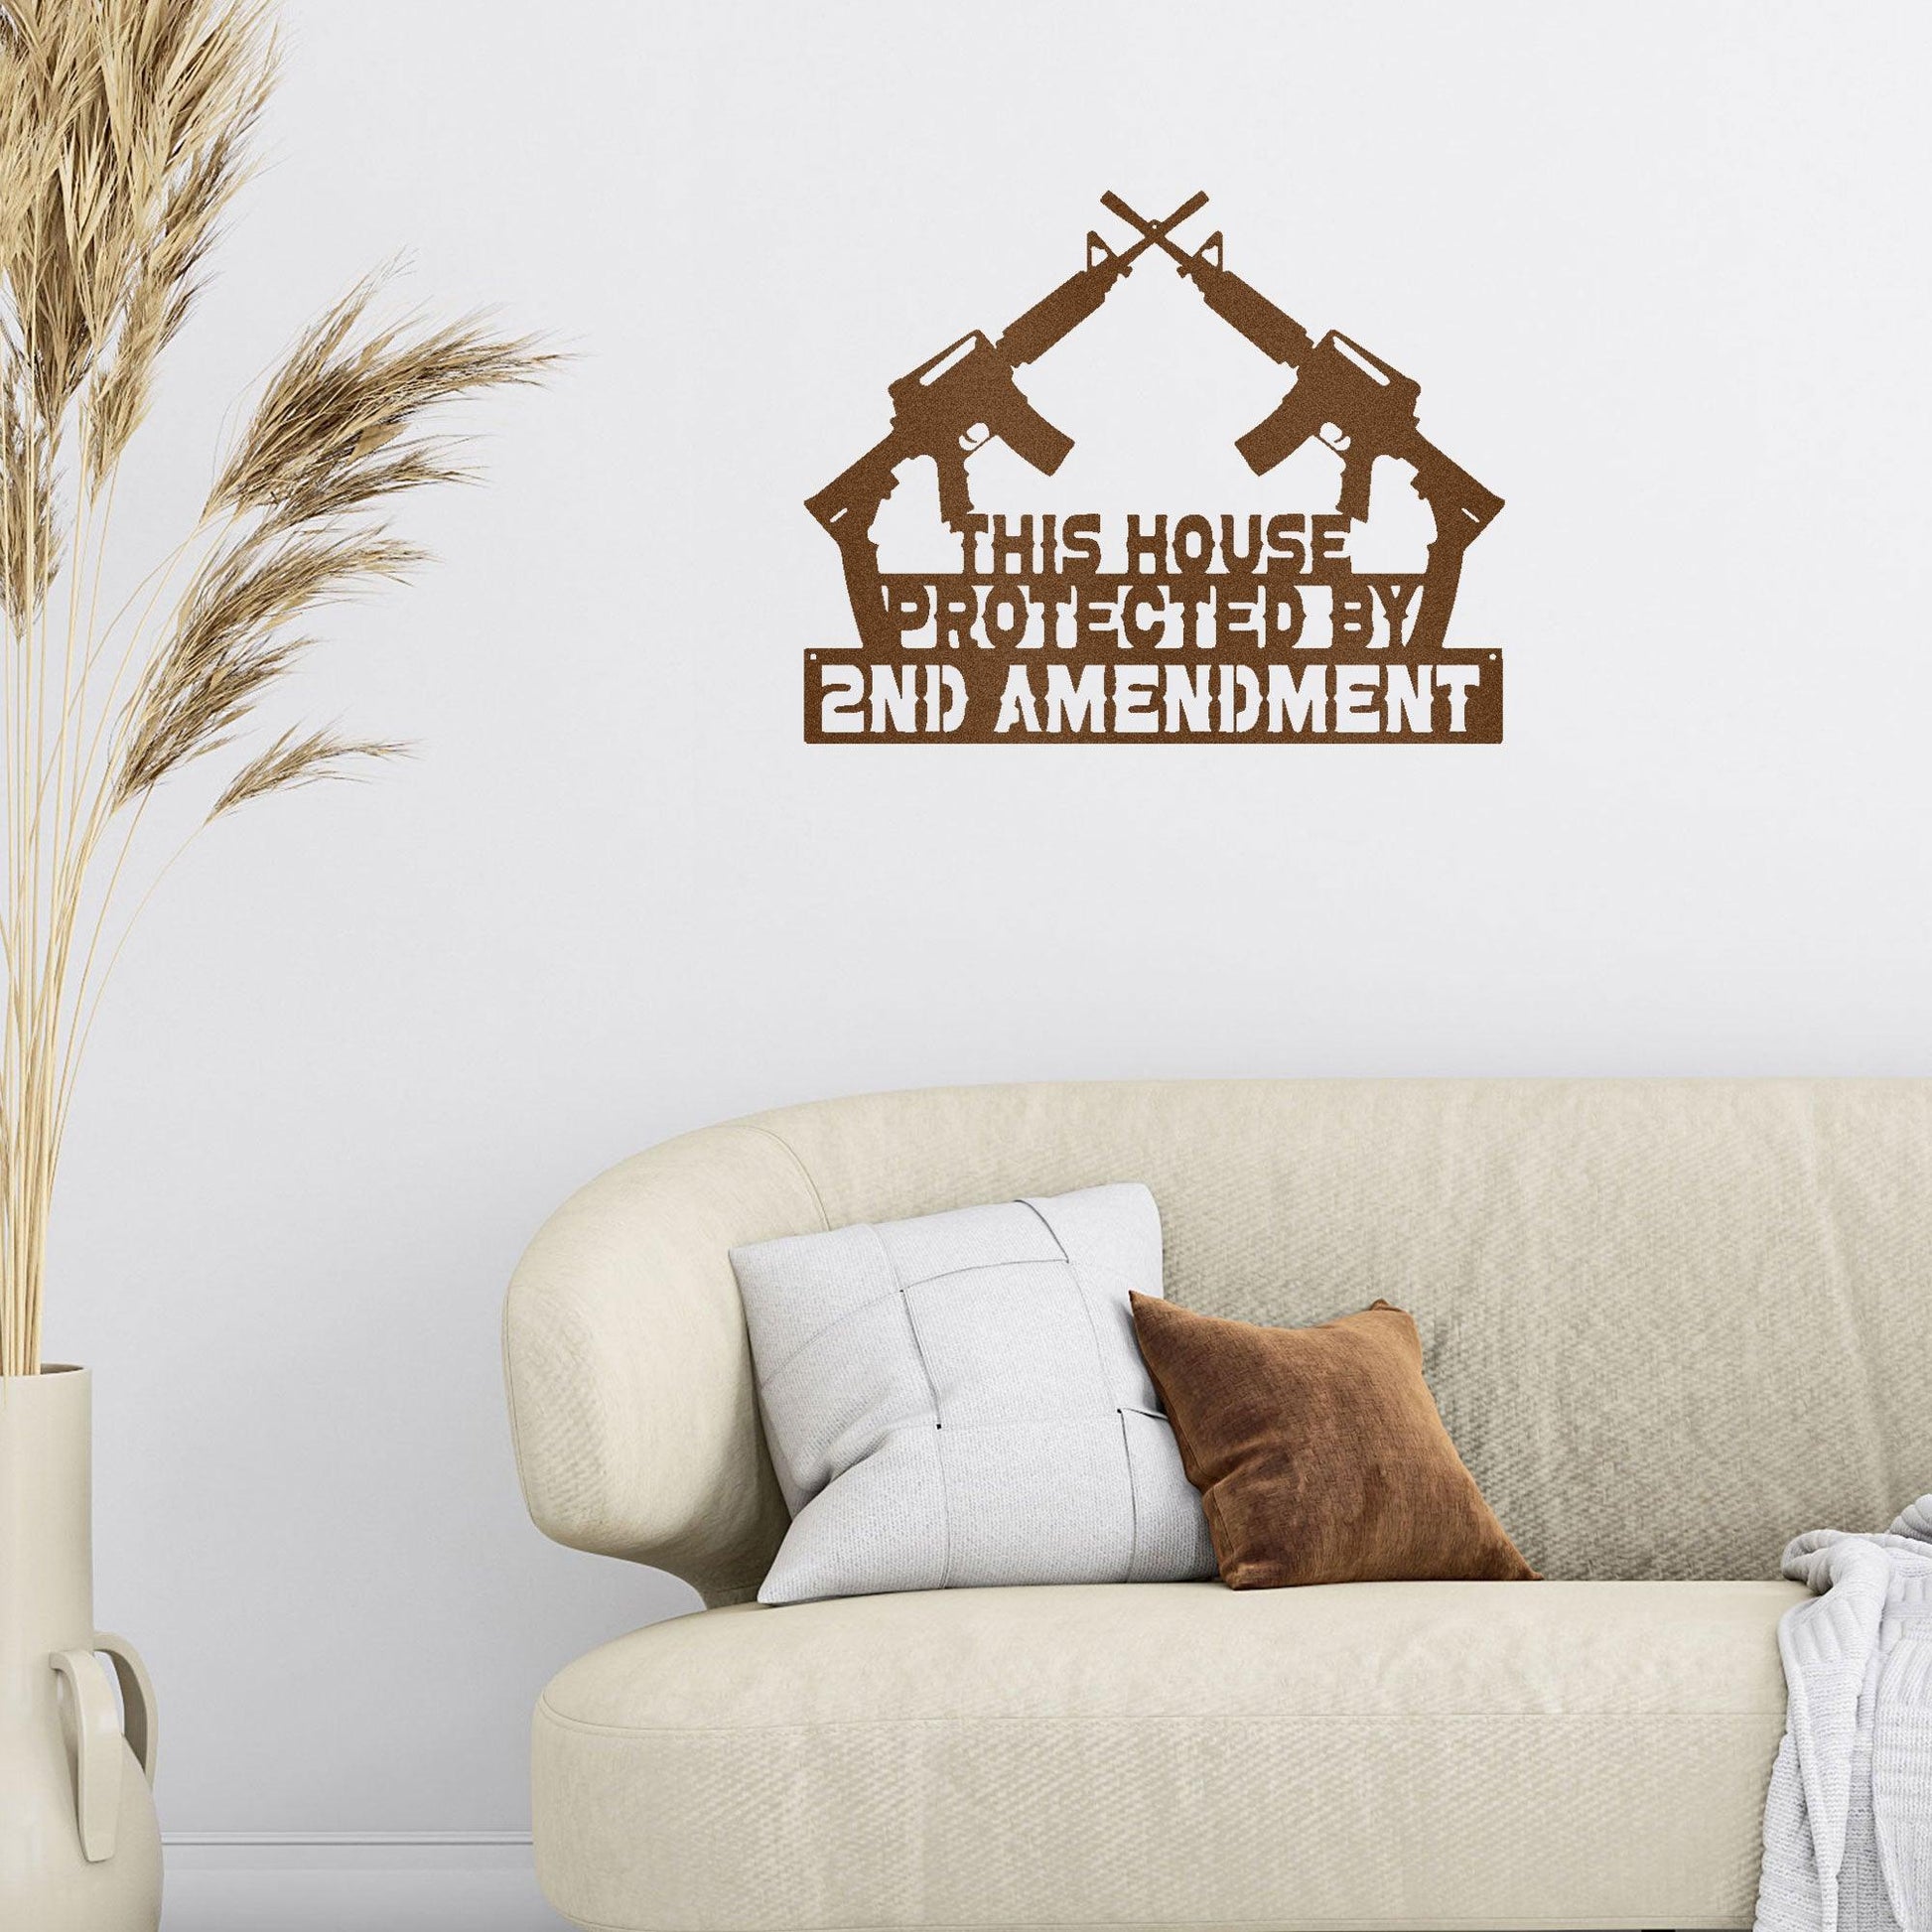 Patriotic Metal Wall Sign Art - This House Protected by Second Amendment - Mallard Moon Gift Shop